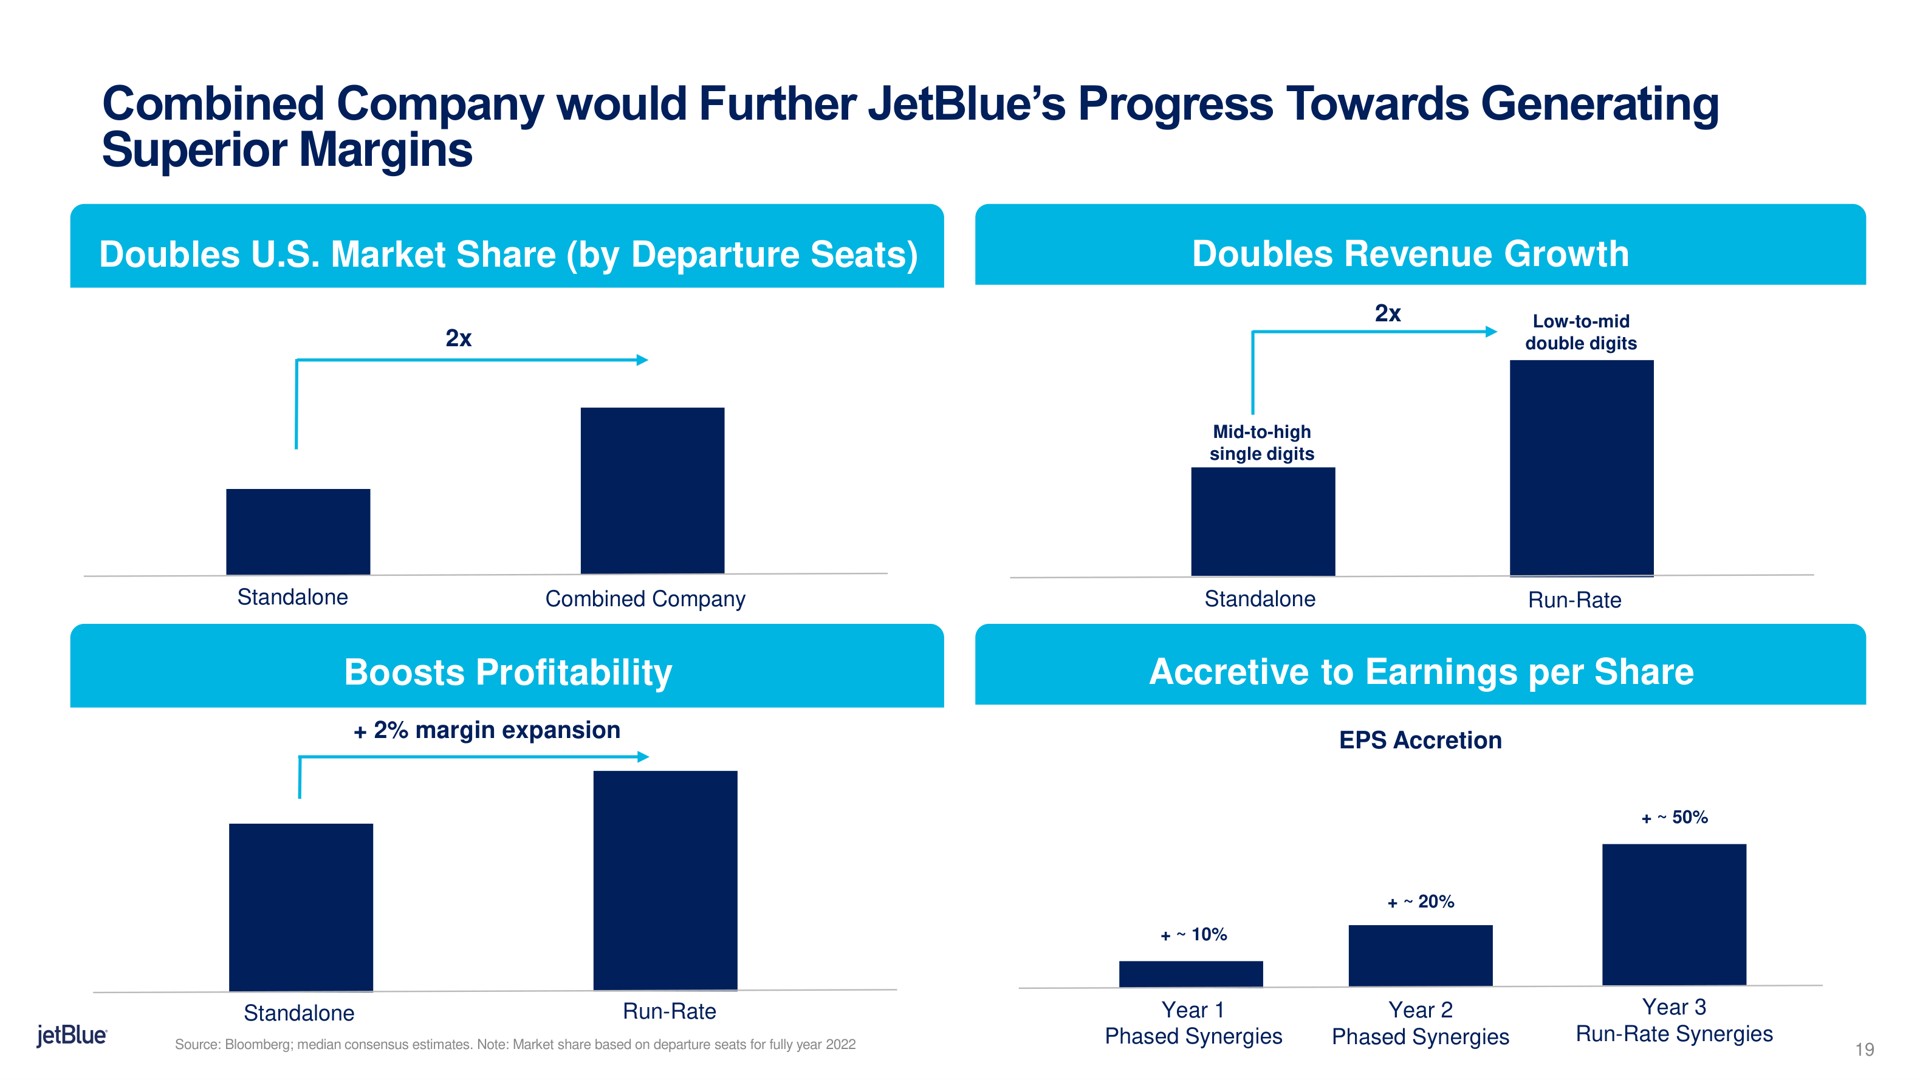 combined company would further progress towards generating superior margins | jetBlue